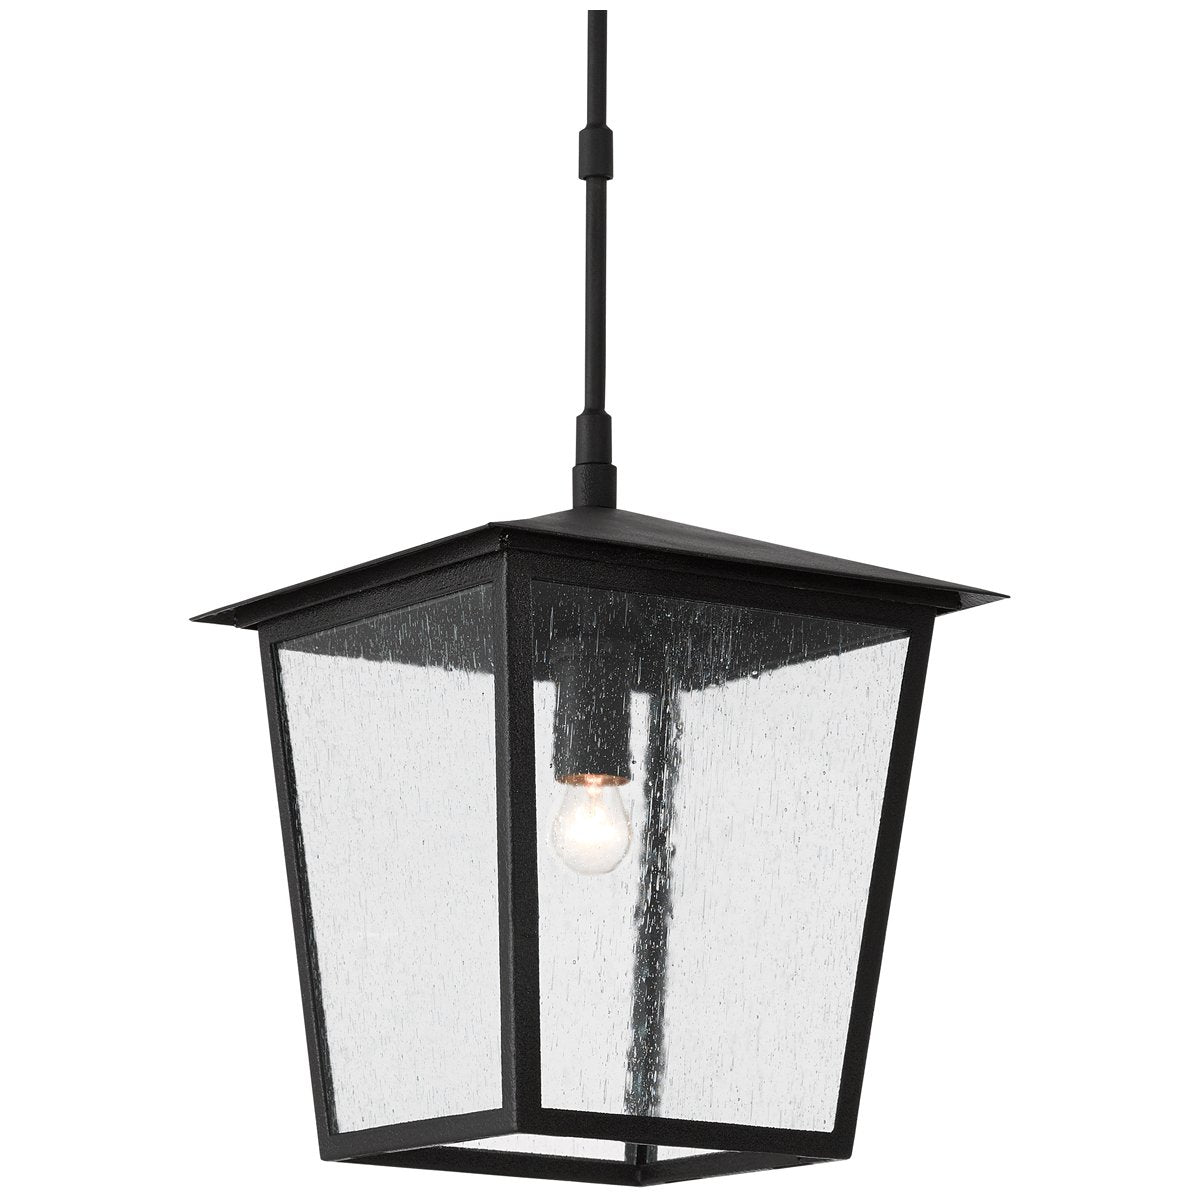 Currey and Company Bening Small Outdoor Lantern